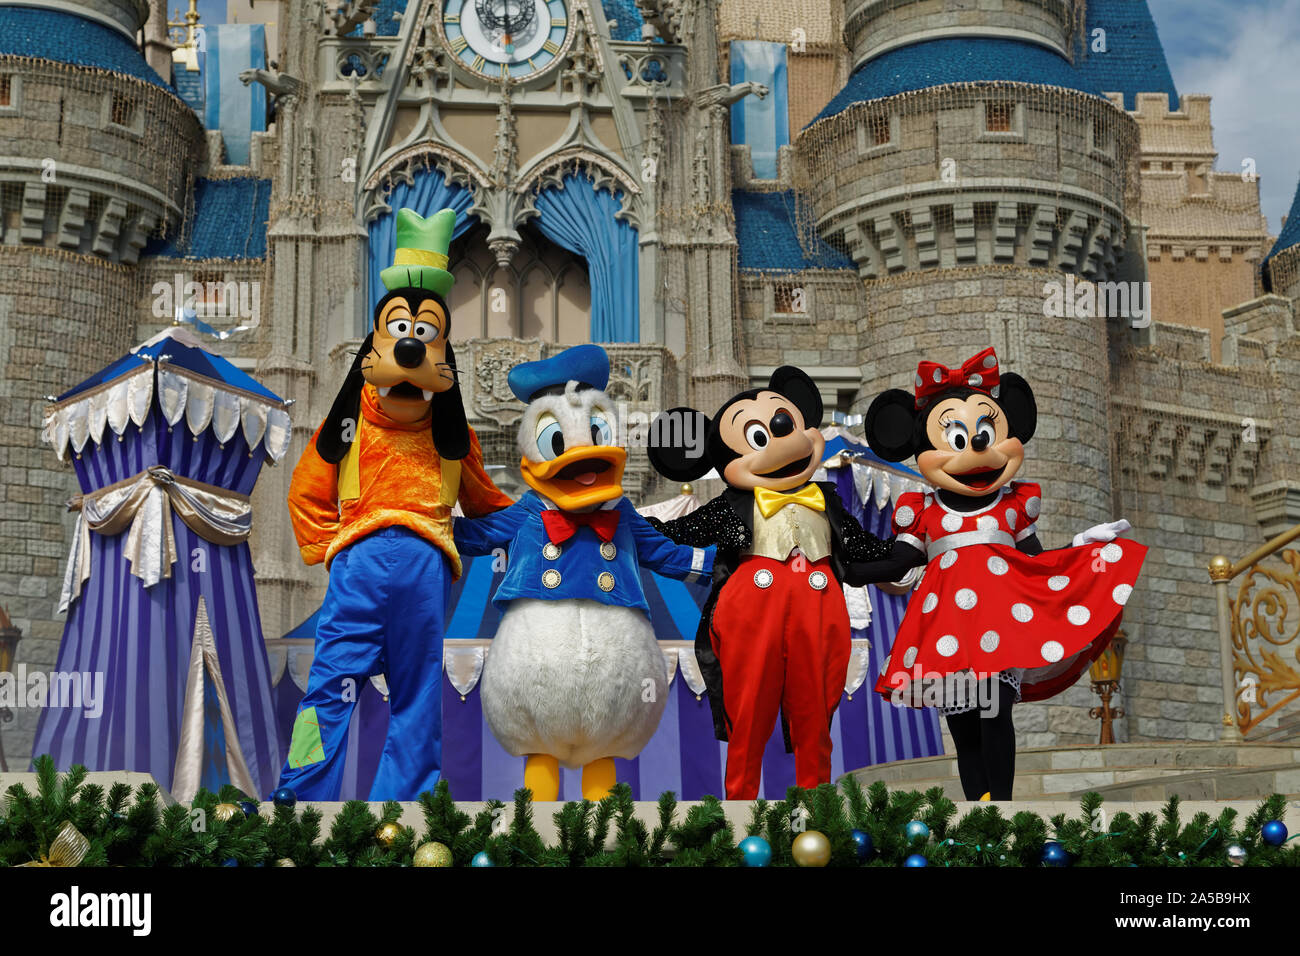 Mickey, Minnie, Goofy and Donald (Disney main characters) dancing in the Dreams Come True performance in Magic Kingdom Orlando Florida, USA Stock Photo